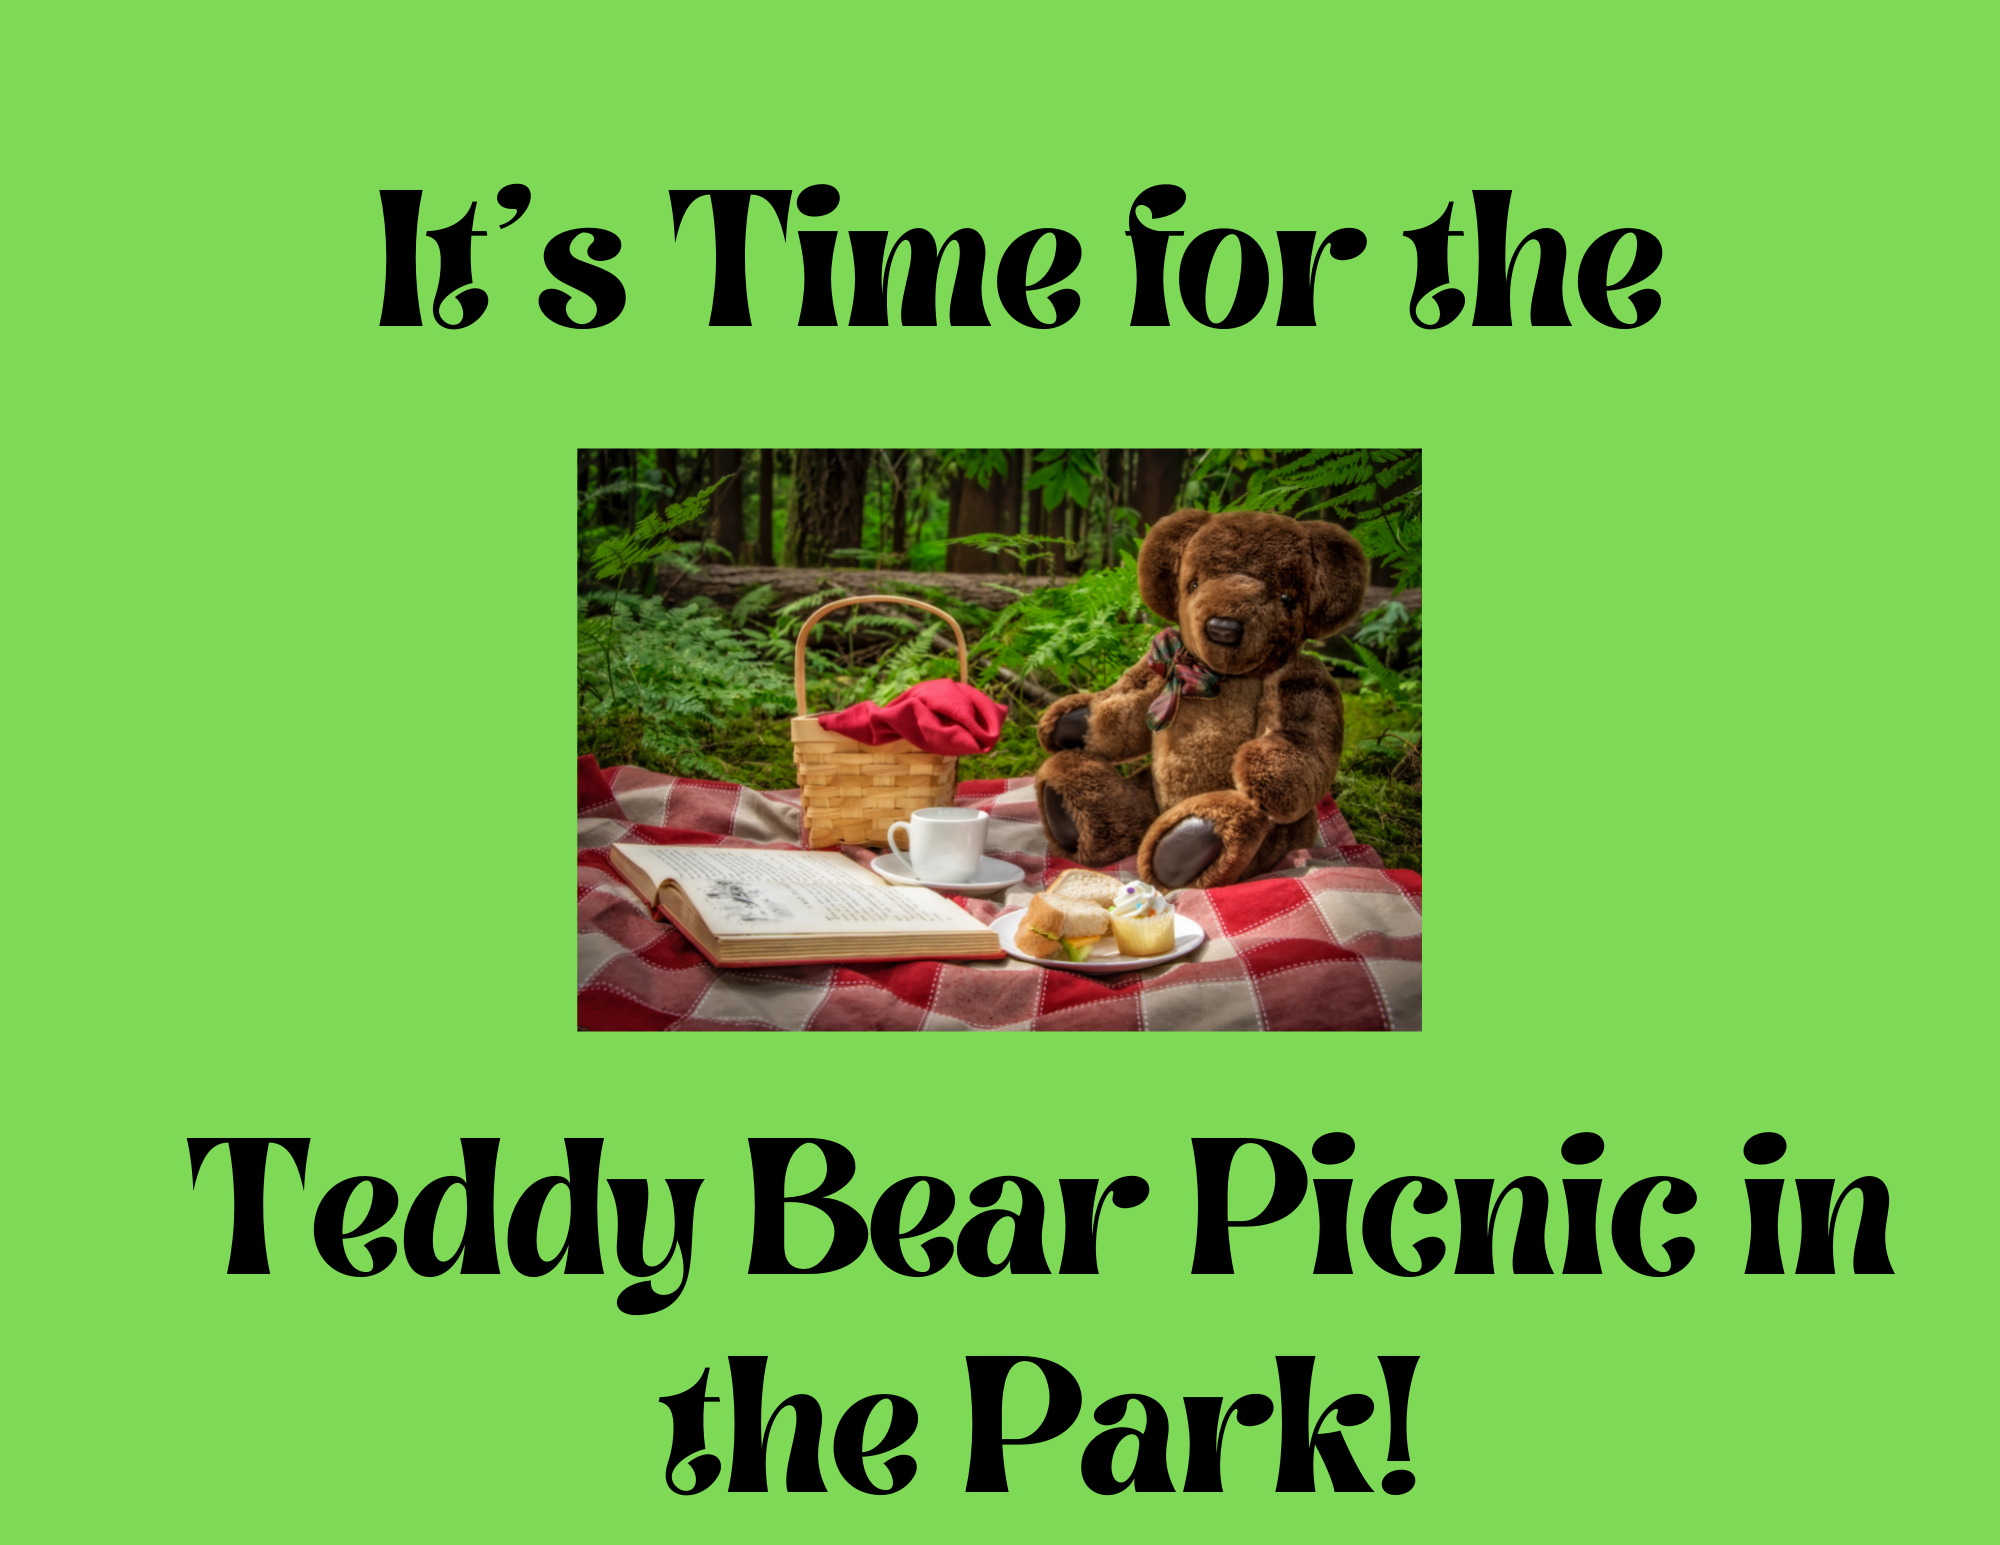 It's time for the Teddy Bear Picnic in the Park!